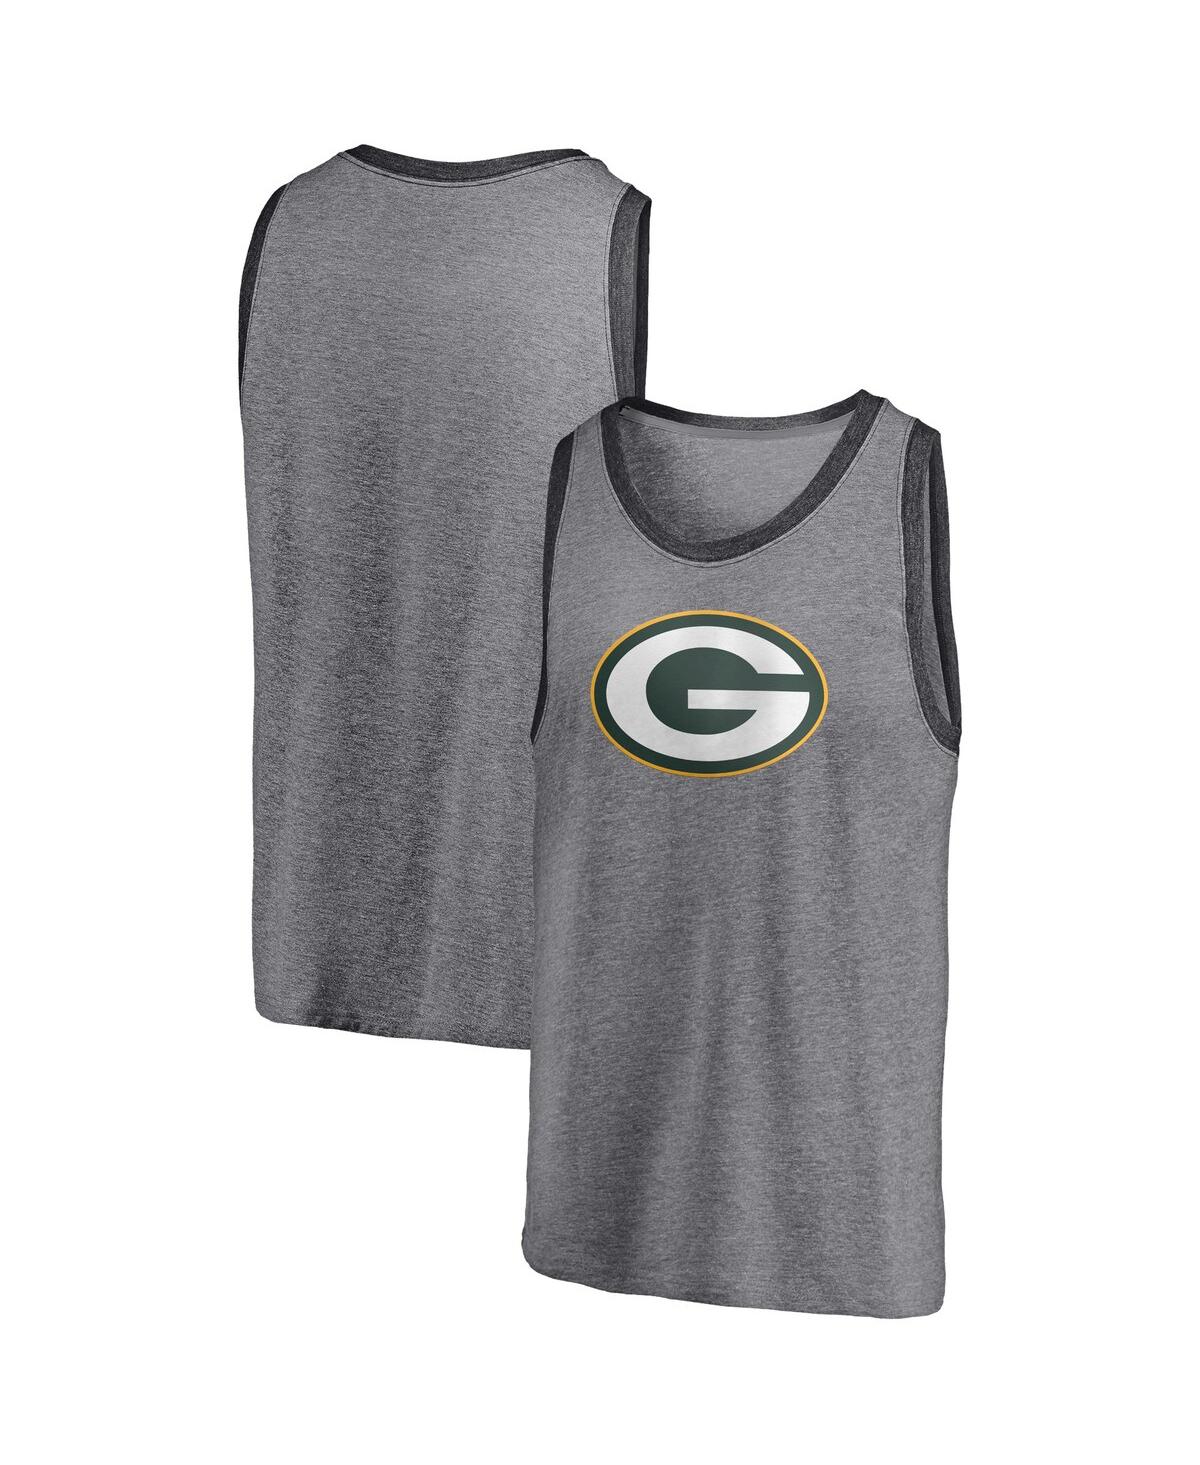 FANATICS MEN'S FANATICS BRANDED HEATHERED GRAY AND HEATHERED CHARCOAL GREEN BAY PACKERS FAMOUS TRI-BLEND TANK